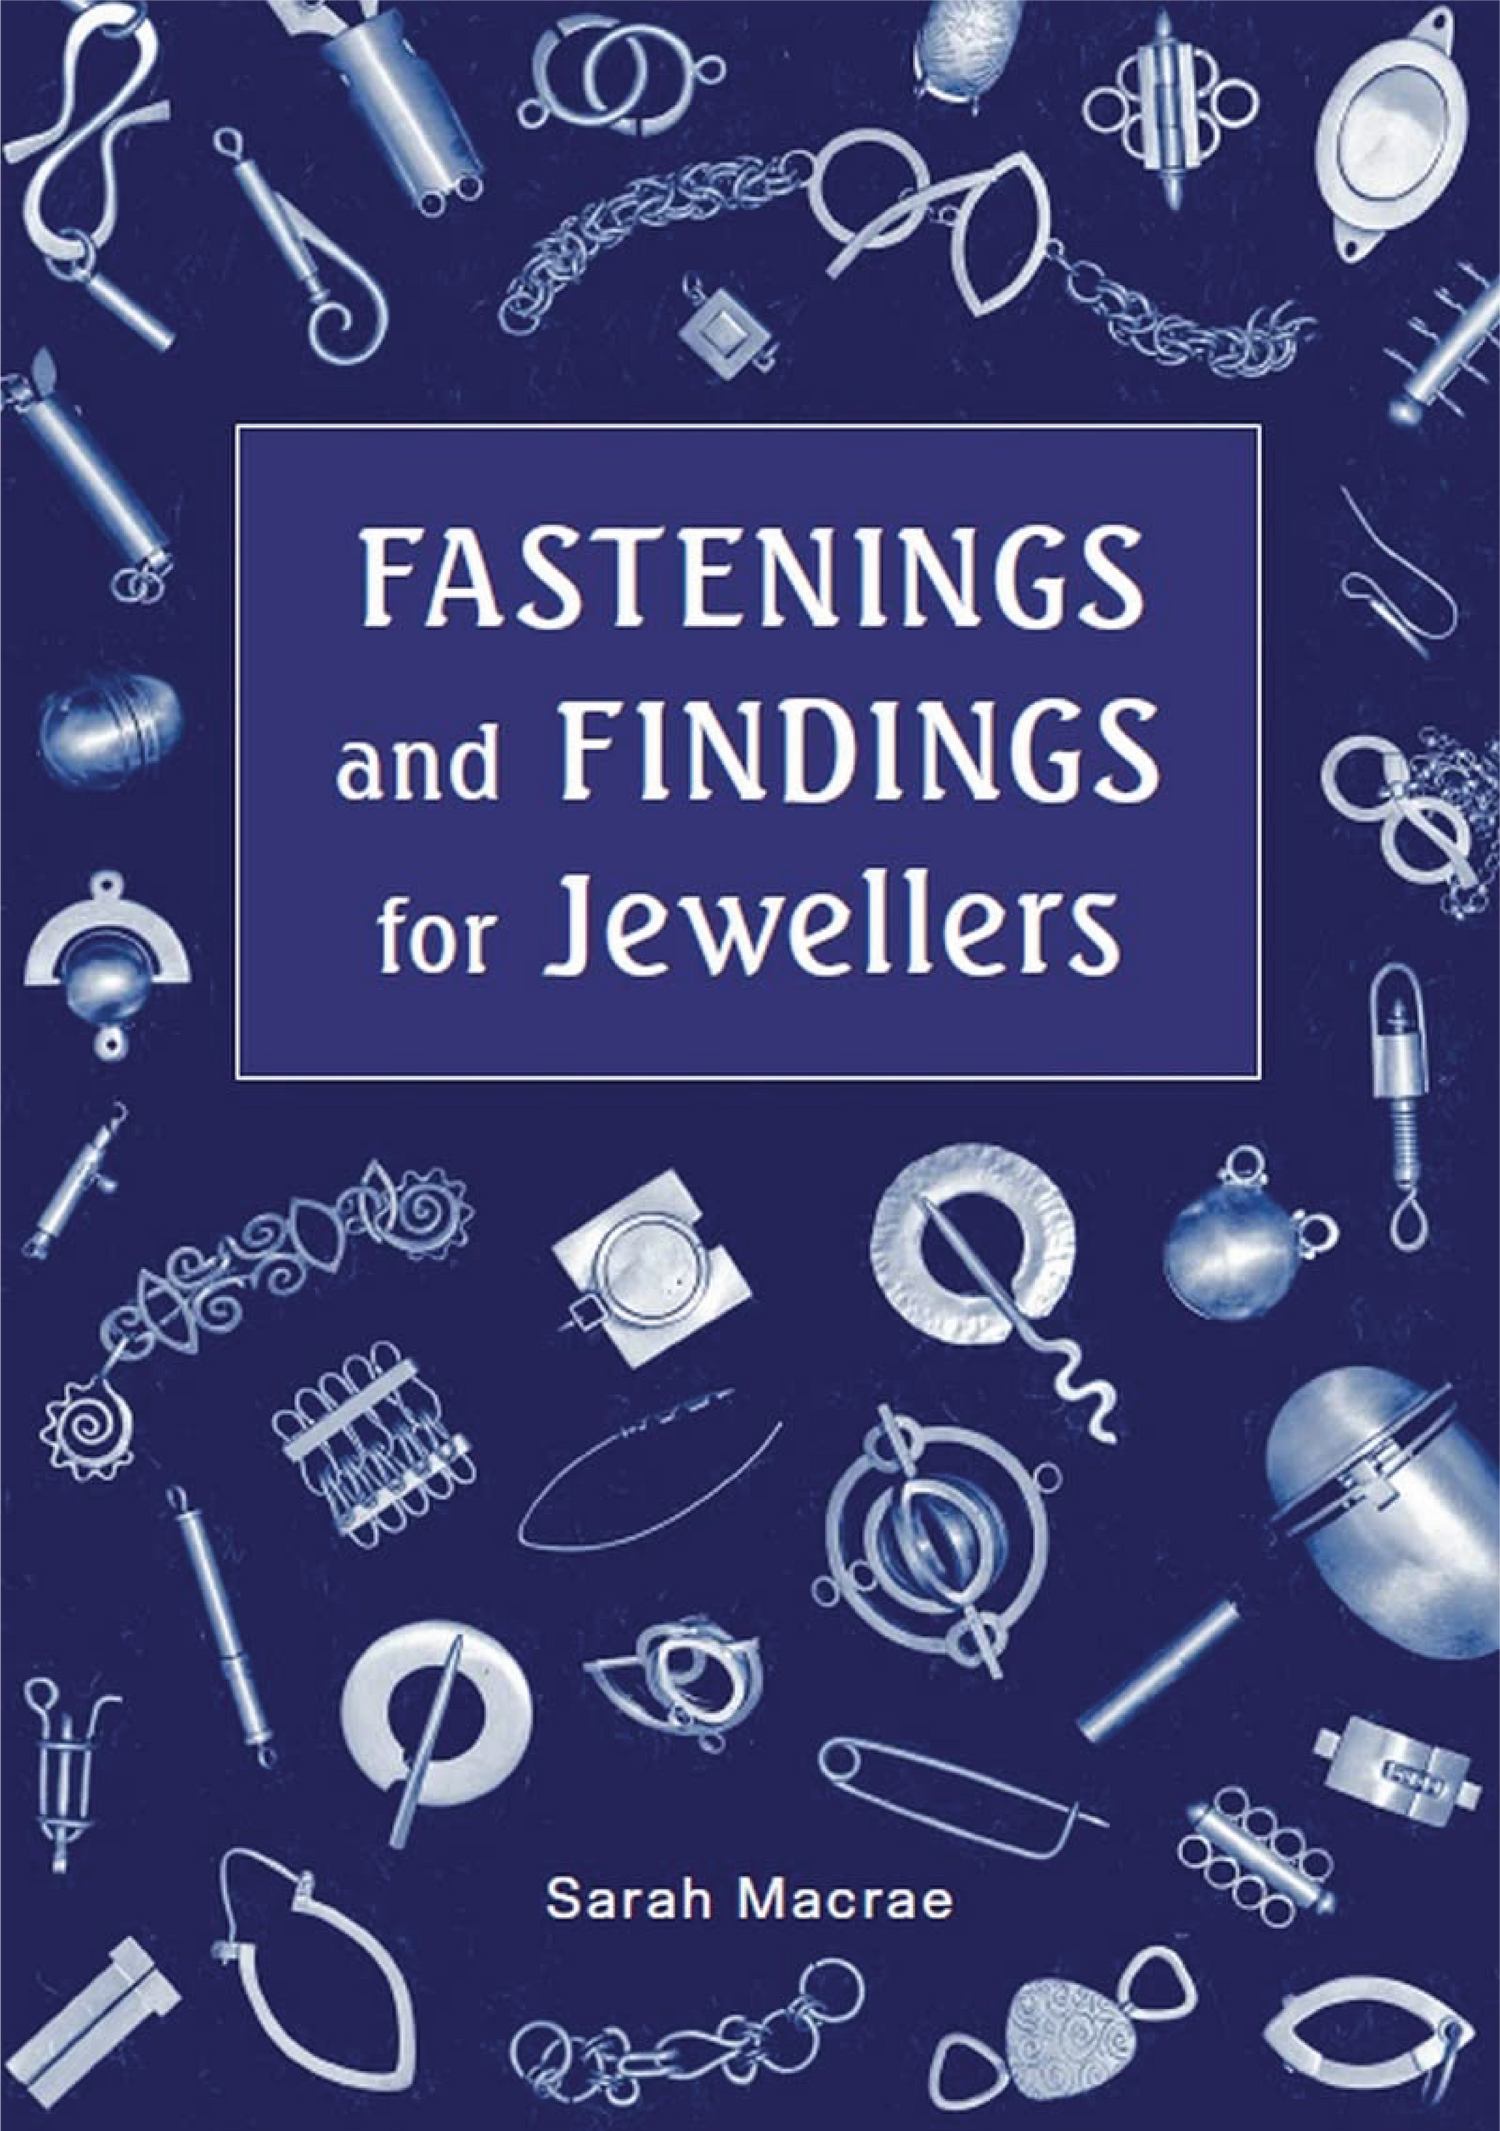 Fastenings and Findings book